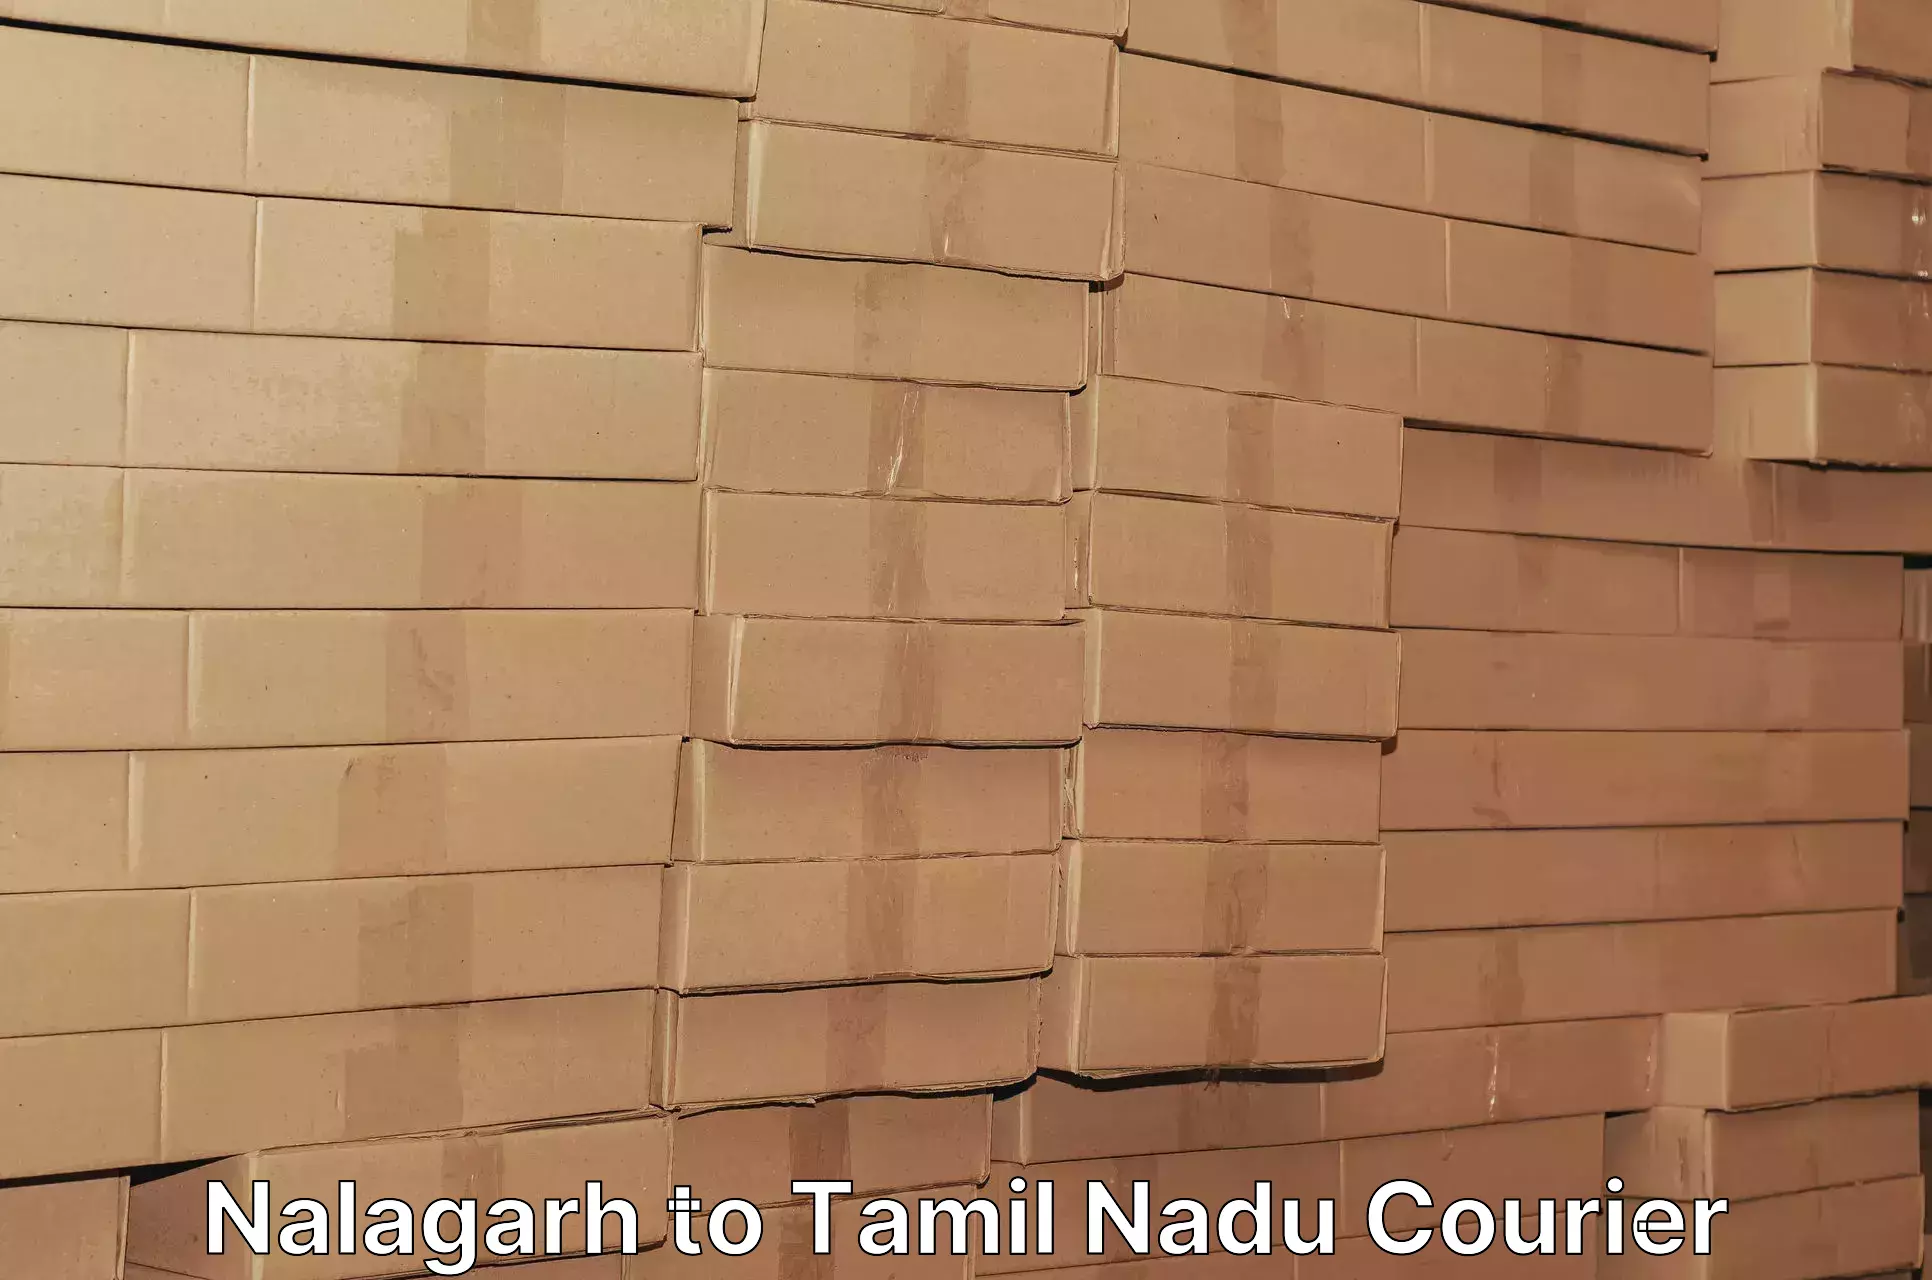 Courier service booking Nalagarh to Tamil Nadu